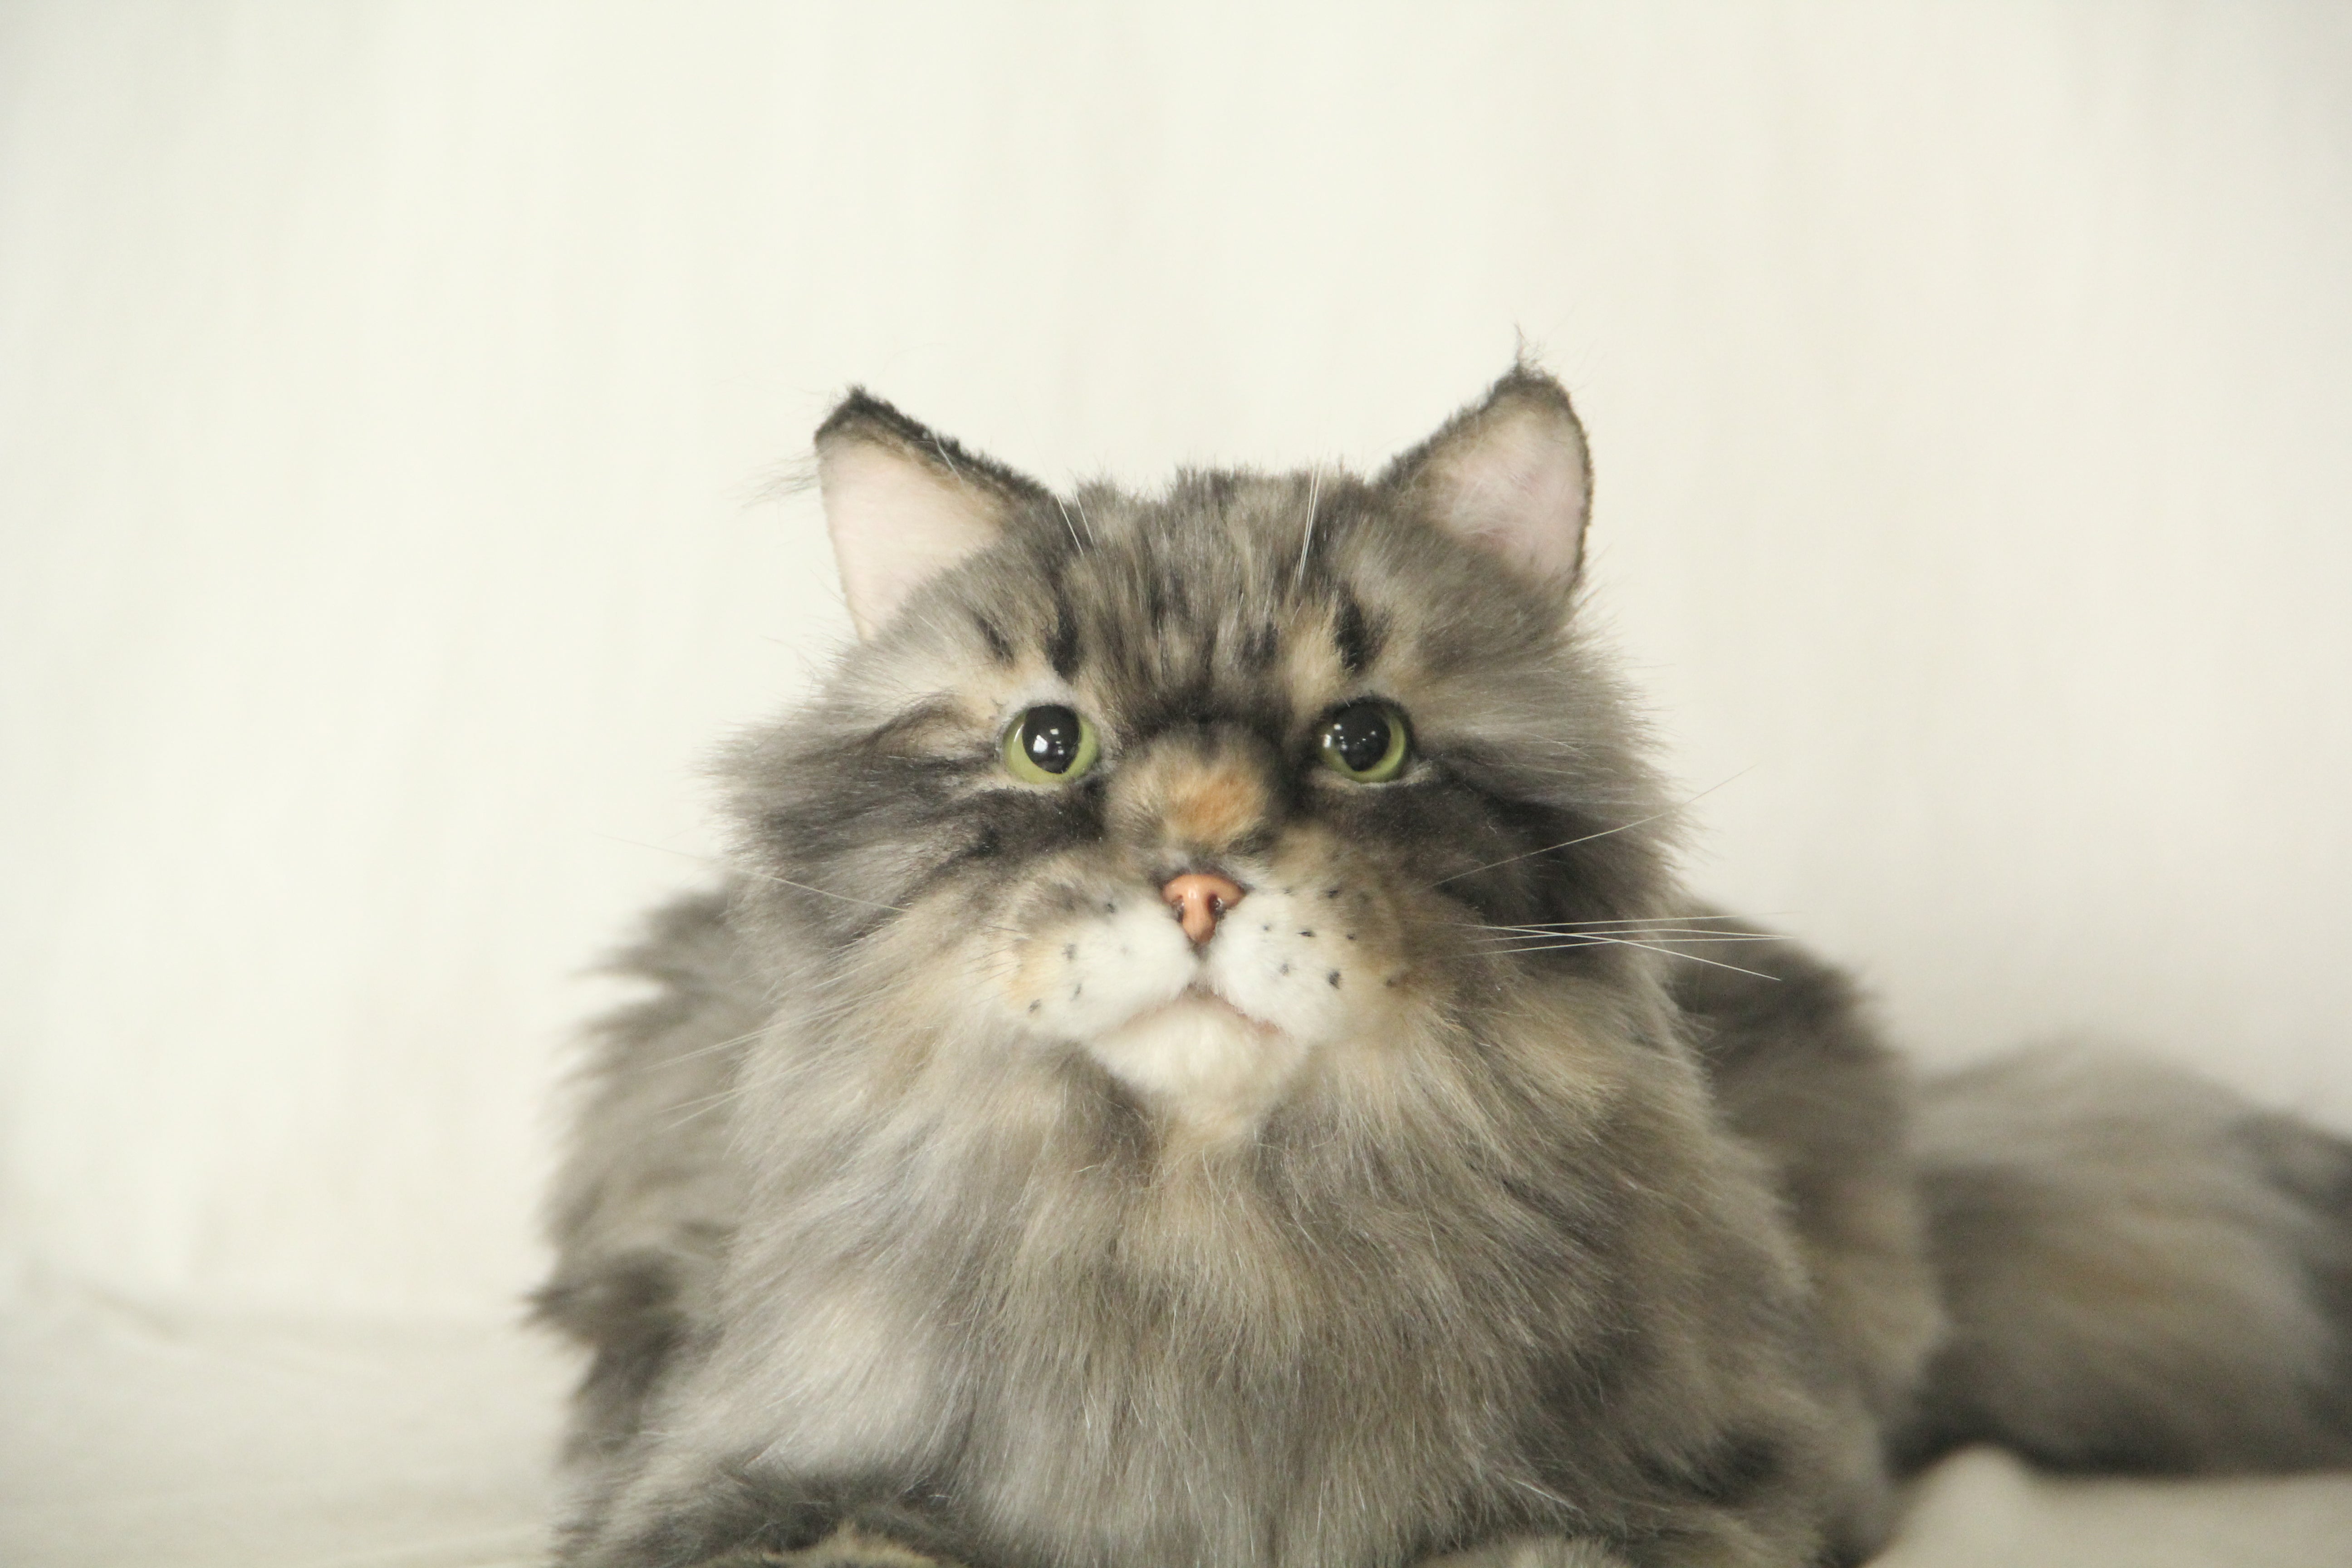 NO.51 Gray long haired cat 3LB/1.4KG